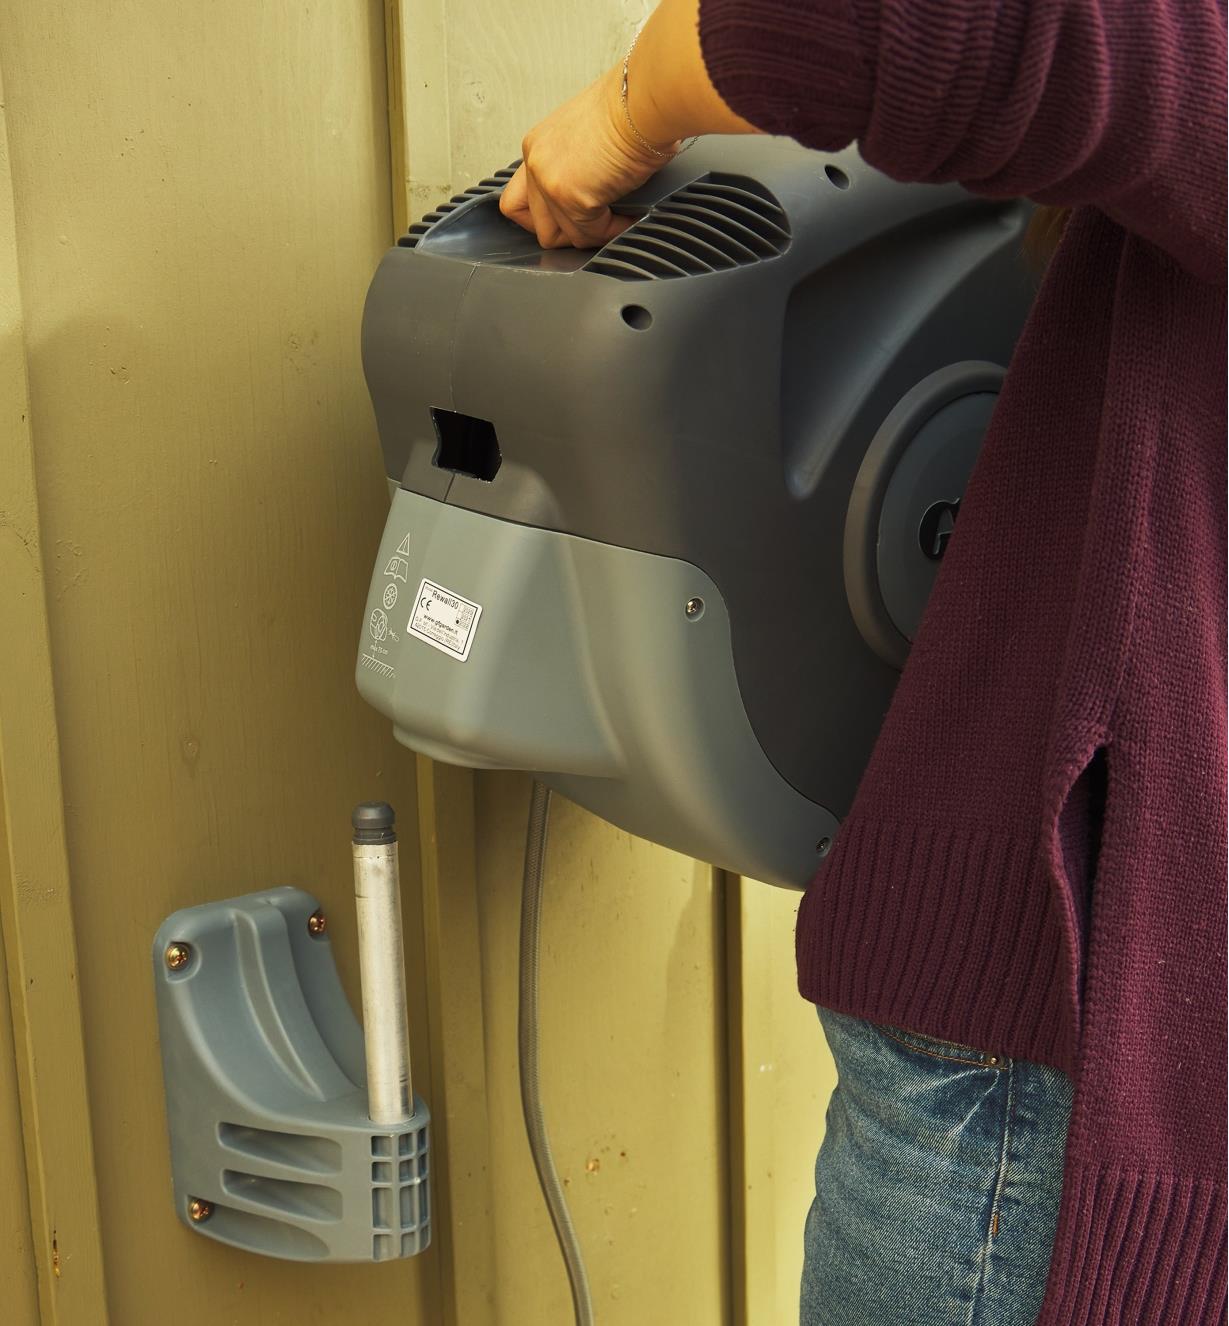 A woman mounts the auto-retracting hose reel to a wall